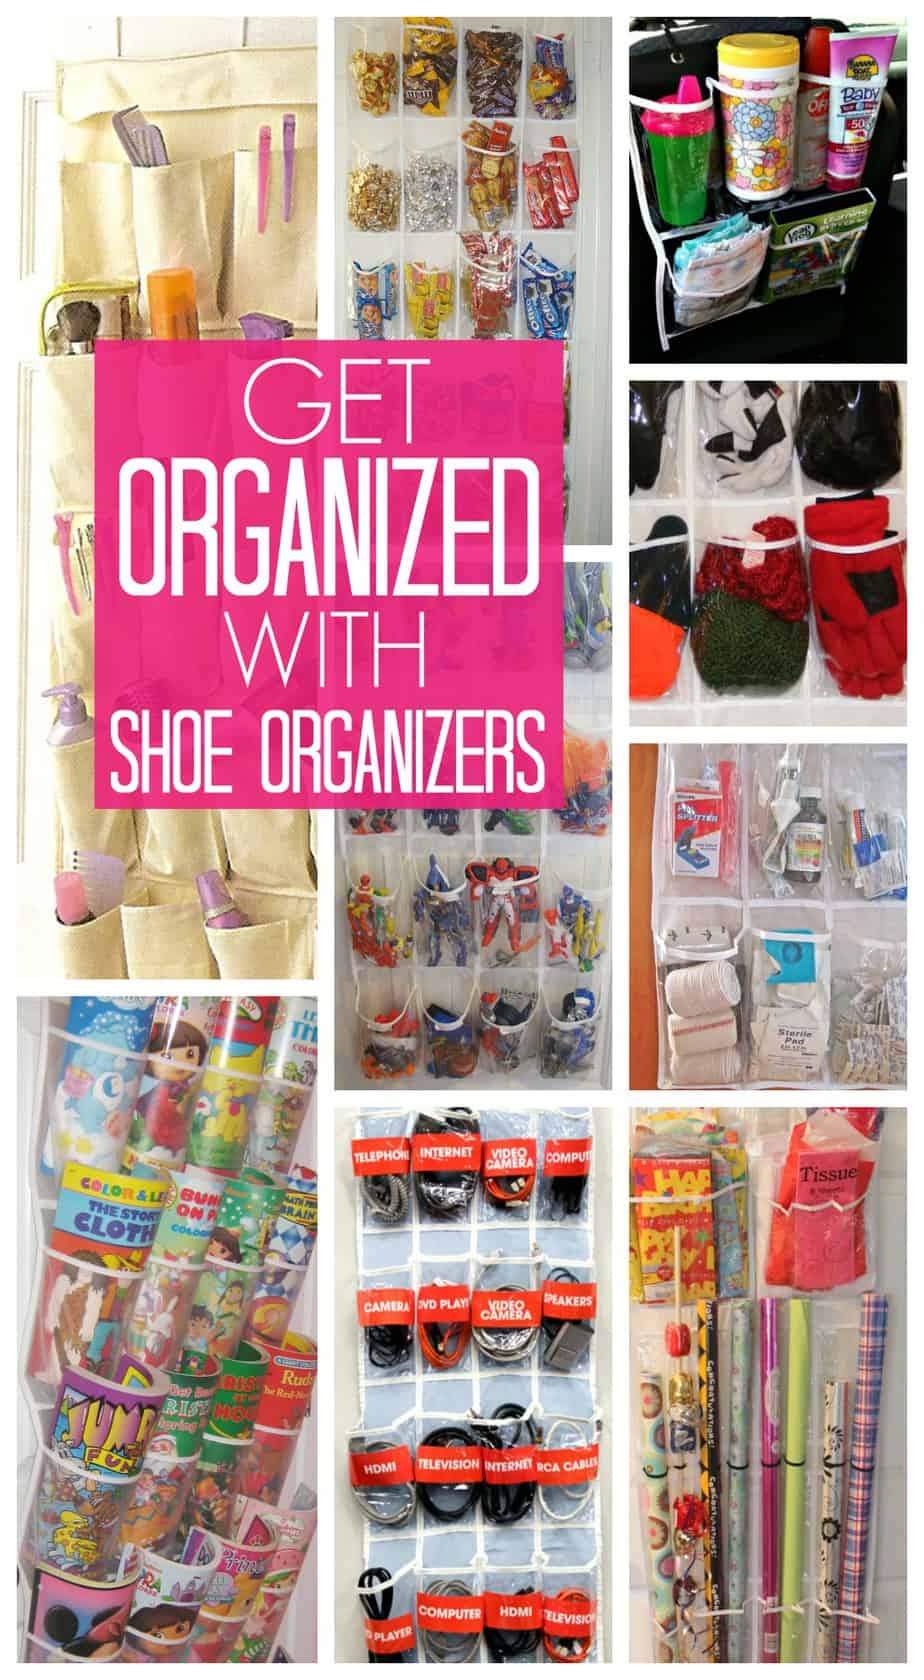 Get Organized with Shoe Organizers